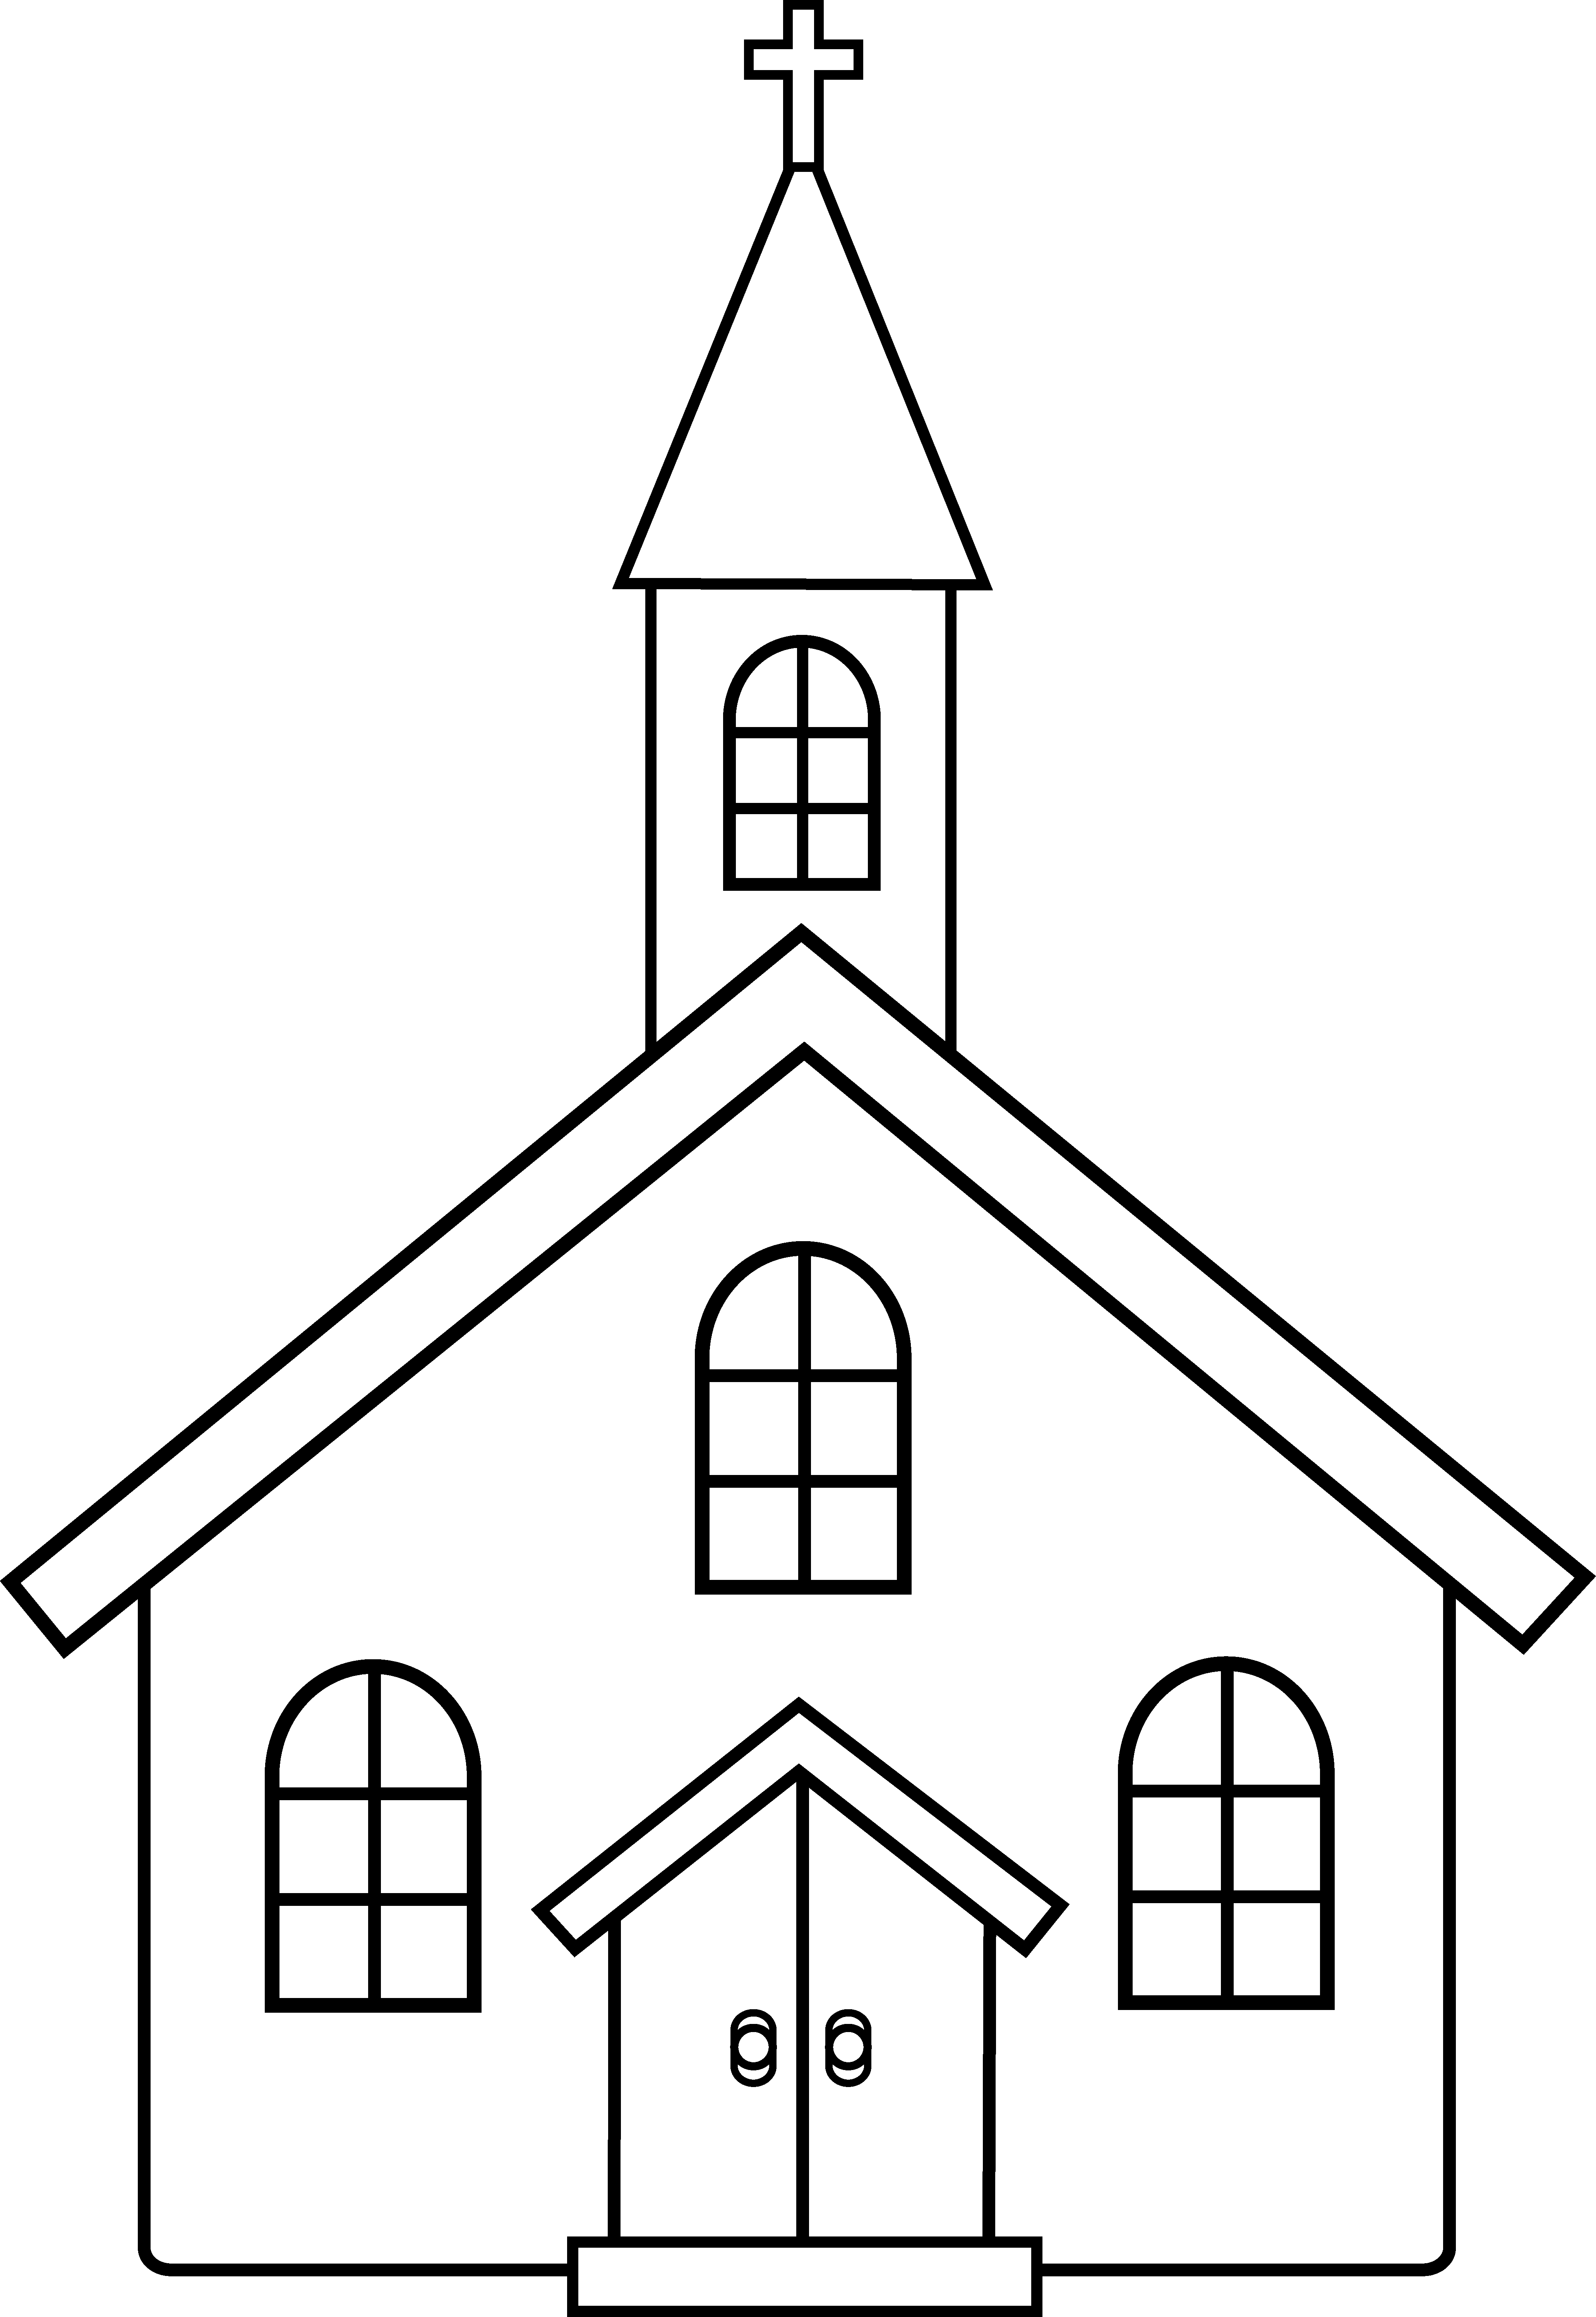 Church building clipart free clipart image 2 